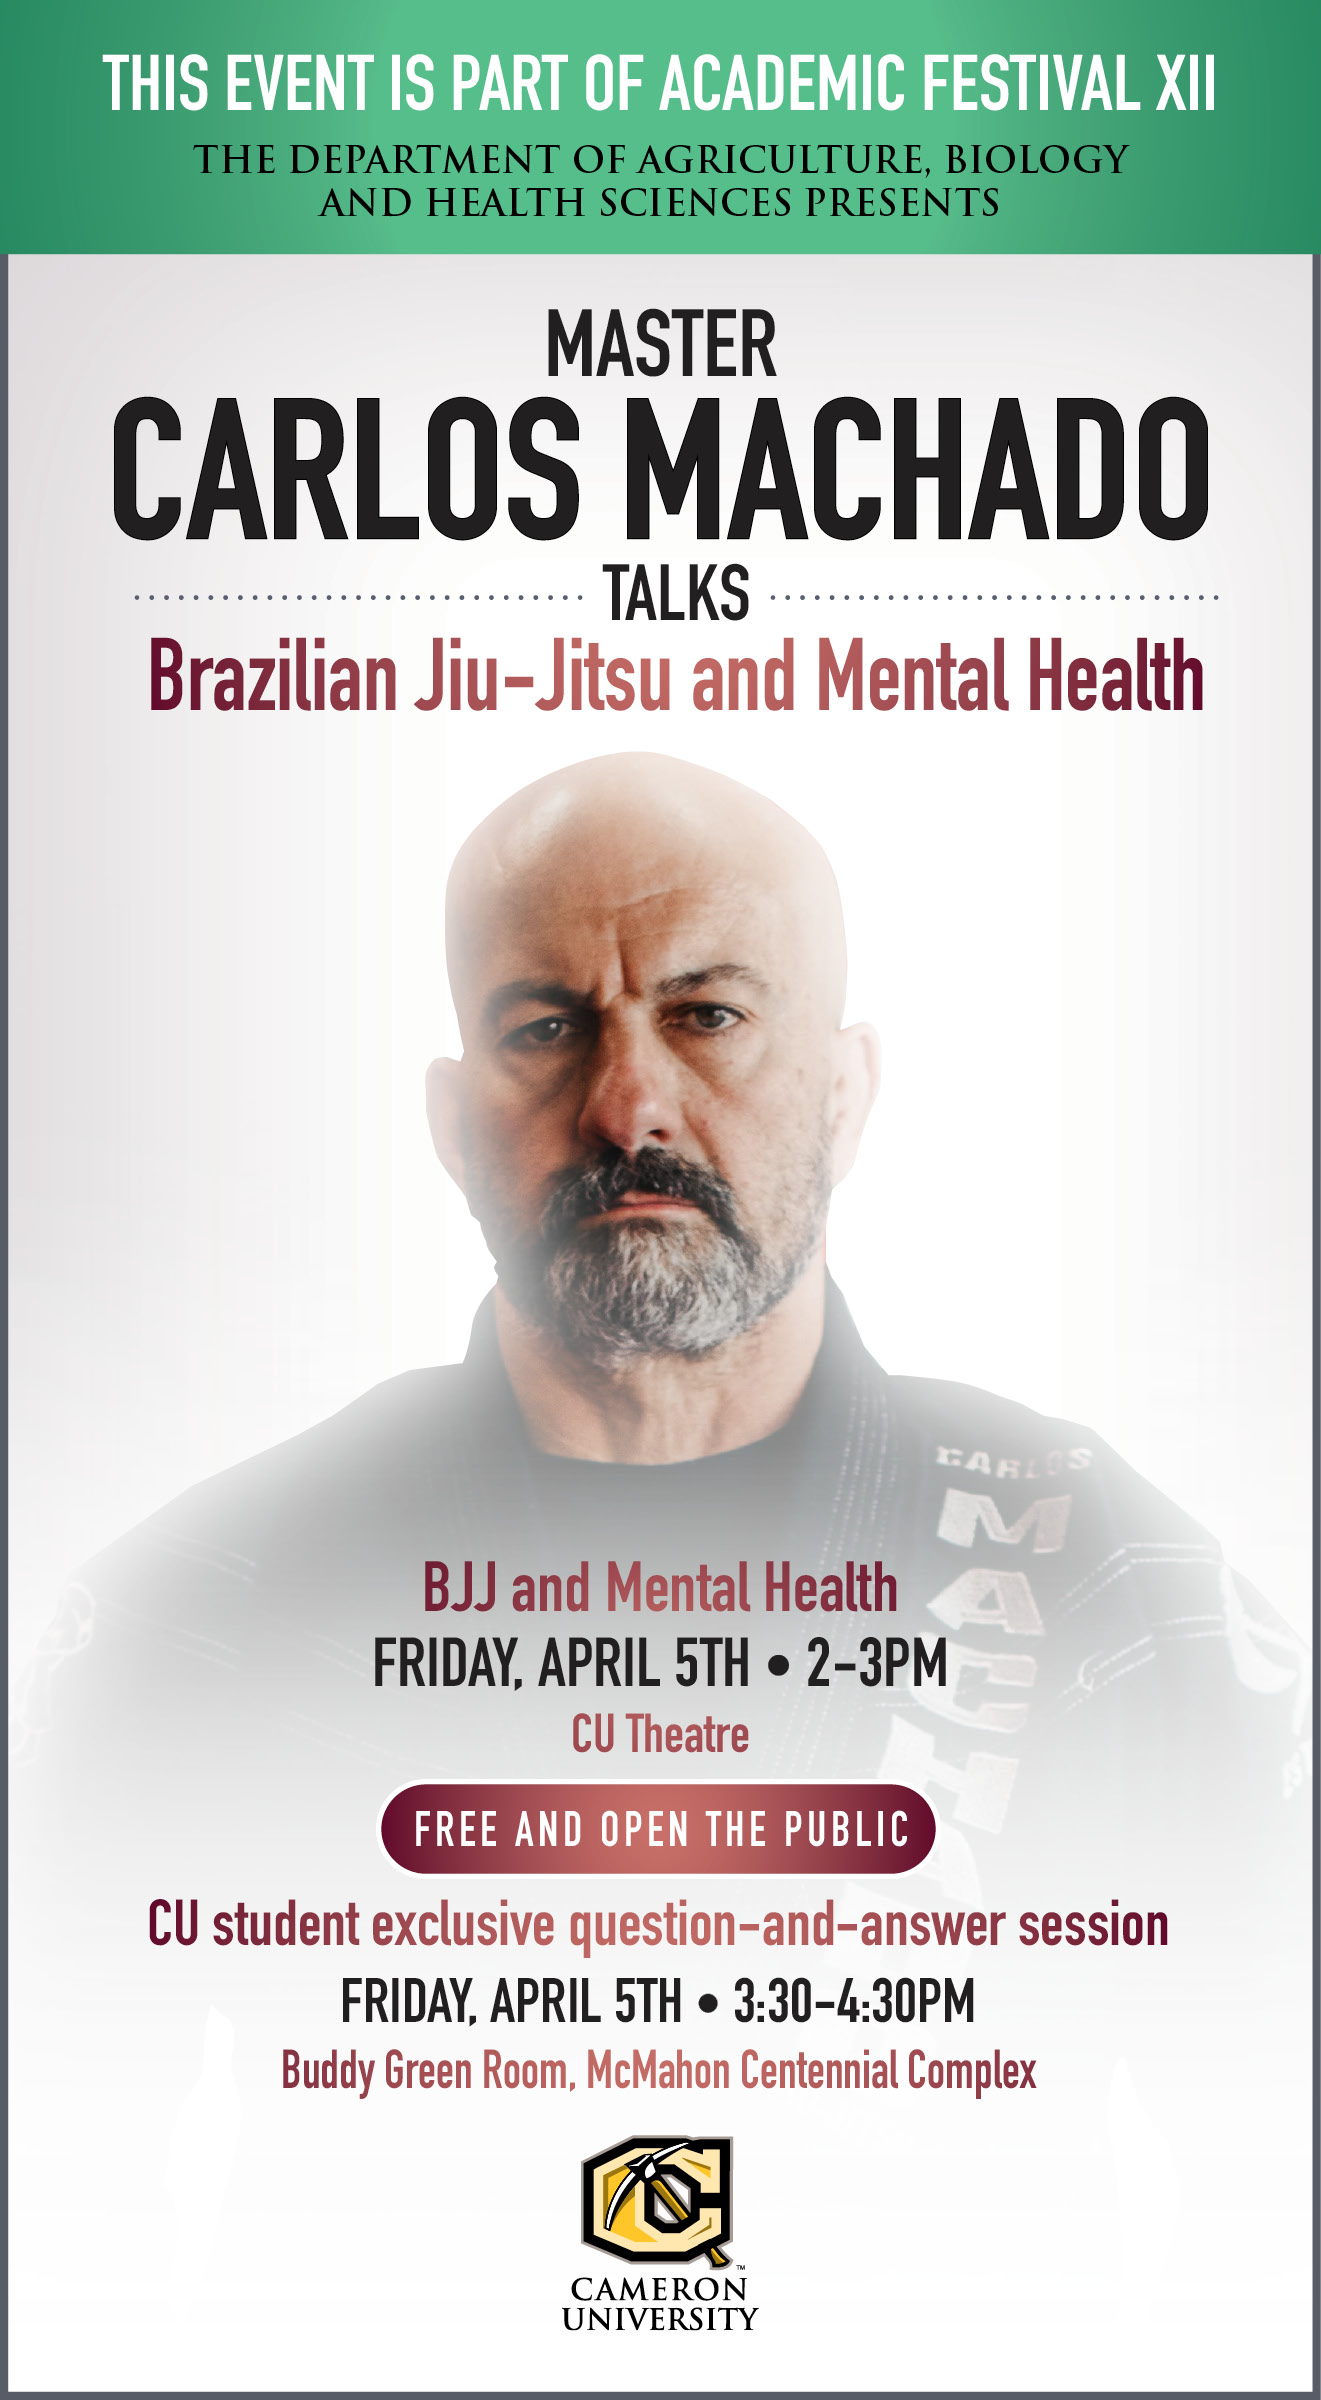 This event is part of Academic Festival XII.
The Department of Agriculture, Bioogy and Health Sciences presents
Master Carlos Machado talk Brazilian Jiu-Jitsu and Mental Health
BJJ and Mental Health
Friday, April 5 2-3 p.m. CU Theatre
Free and Open to the Public
CU student exclusive question and answer session
Friday, April 5 3:30 - 4:30 p.m.
Buddy Green Room, McMahon Centennial Complex